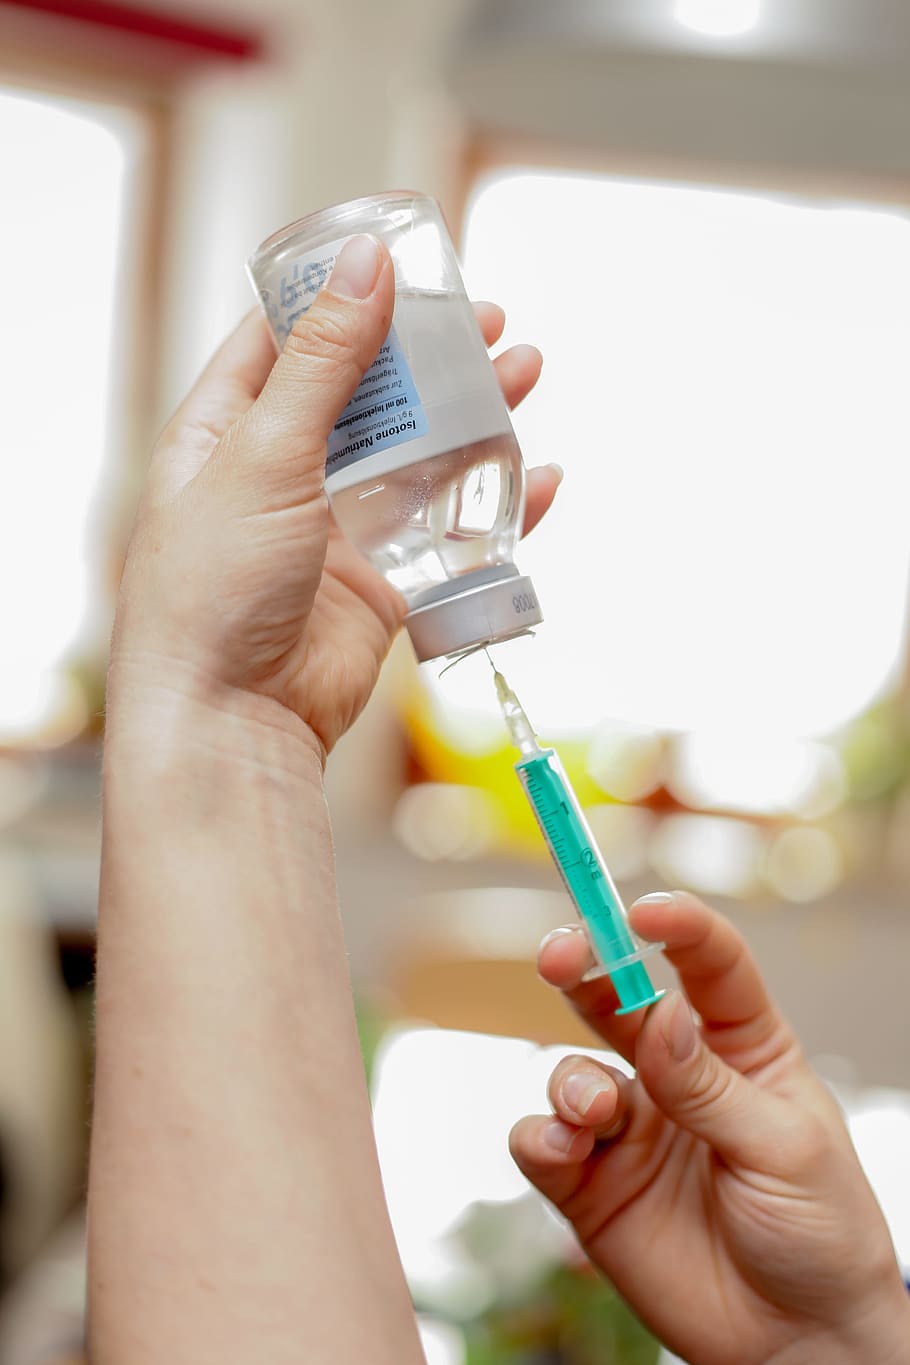 person getting clear liquid in bottle using syringe, vaccination